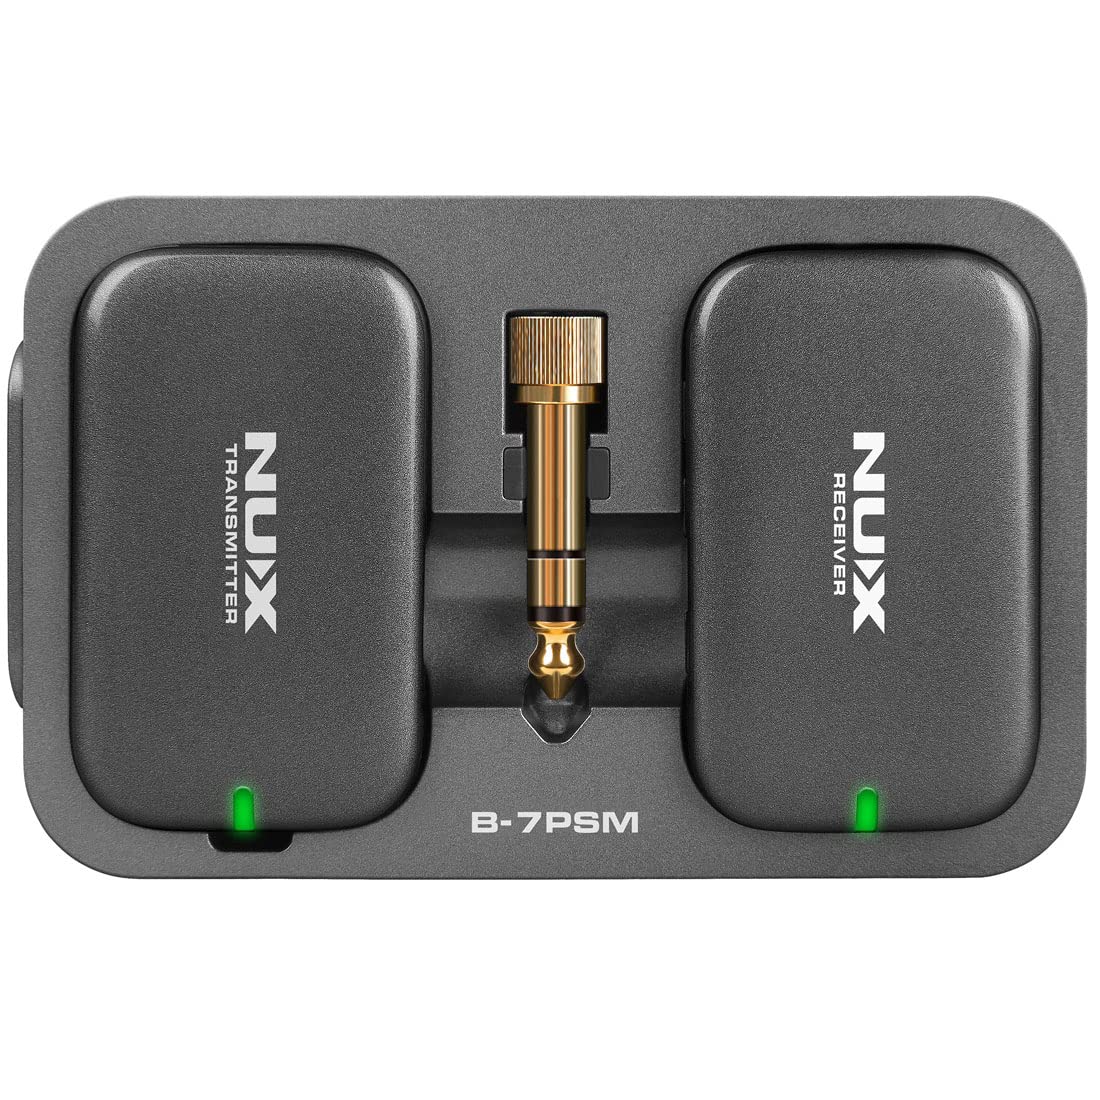 NUX - B-7PSM 5.8 GHz Wireless in-Ear Monitoring System, Charging Case Included, Stereo Audio transmitting